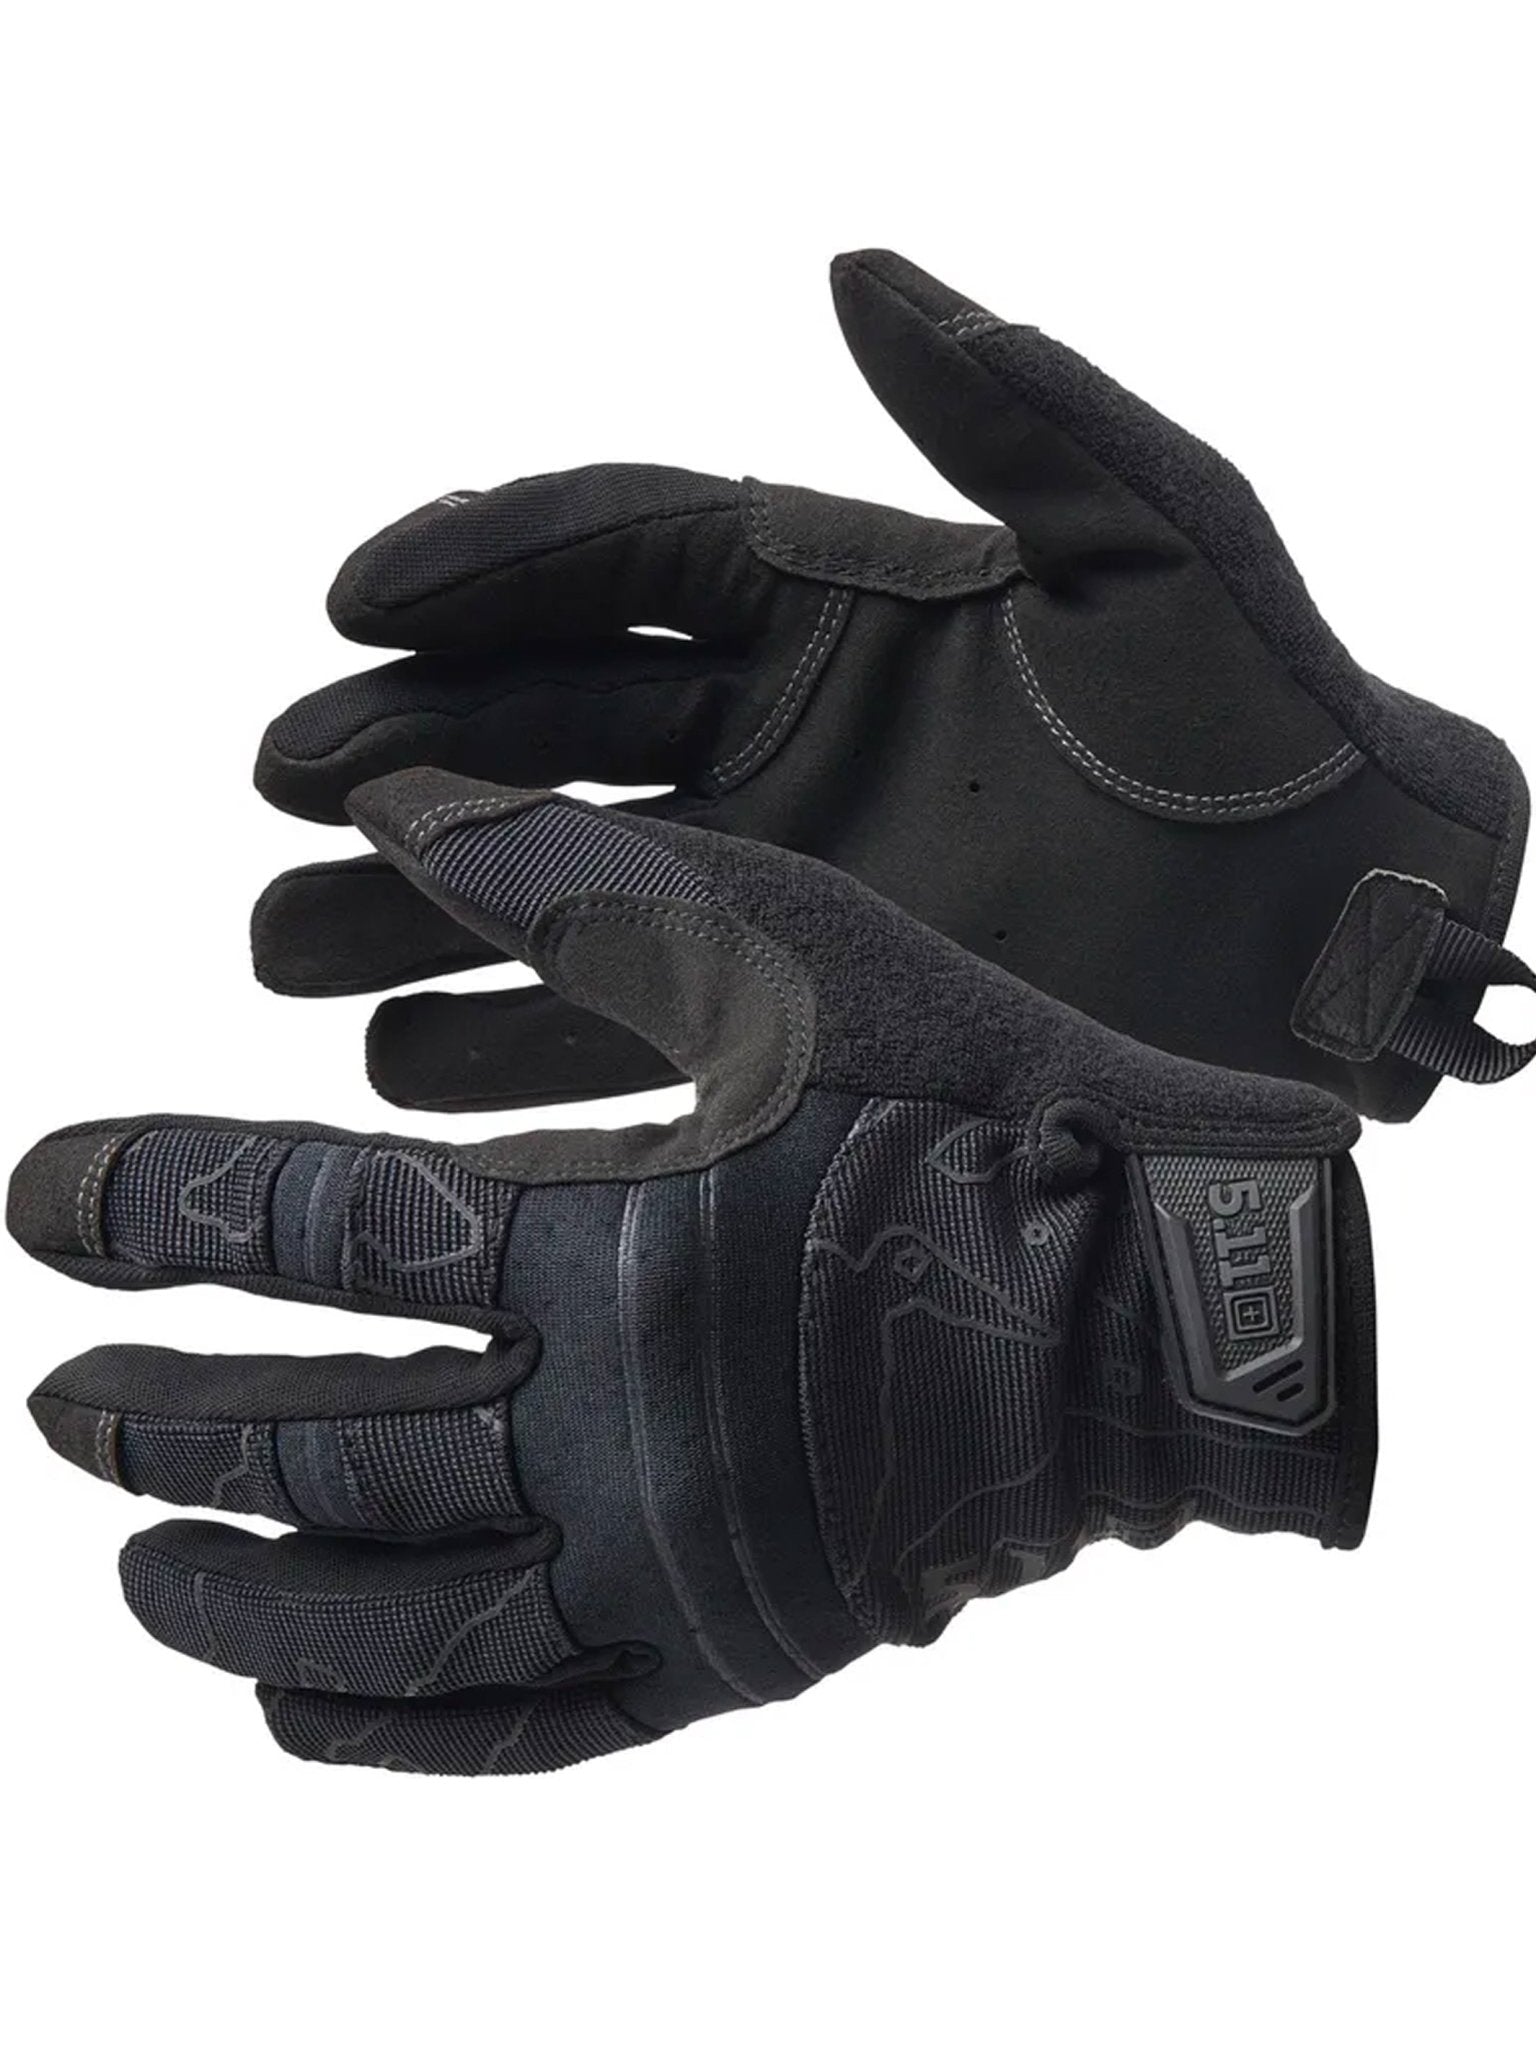 4elementsclothing5.11 Tactical5.11 Tactical - 5.11 COMPETITION SHOOTING 2.0 GLOVE - Touchscreen taper wrap gloves, Nylon EN388:2016- 3111X; EN ISO 21420 - Style 59394Gloves59394-019-S